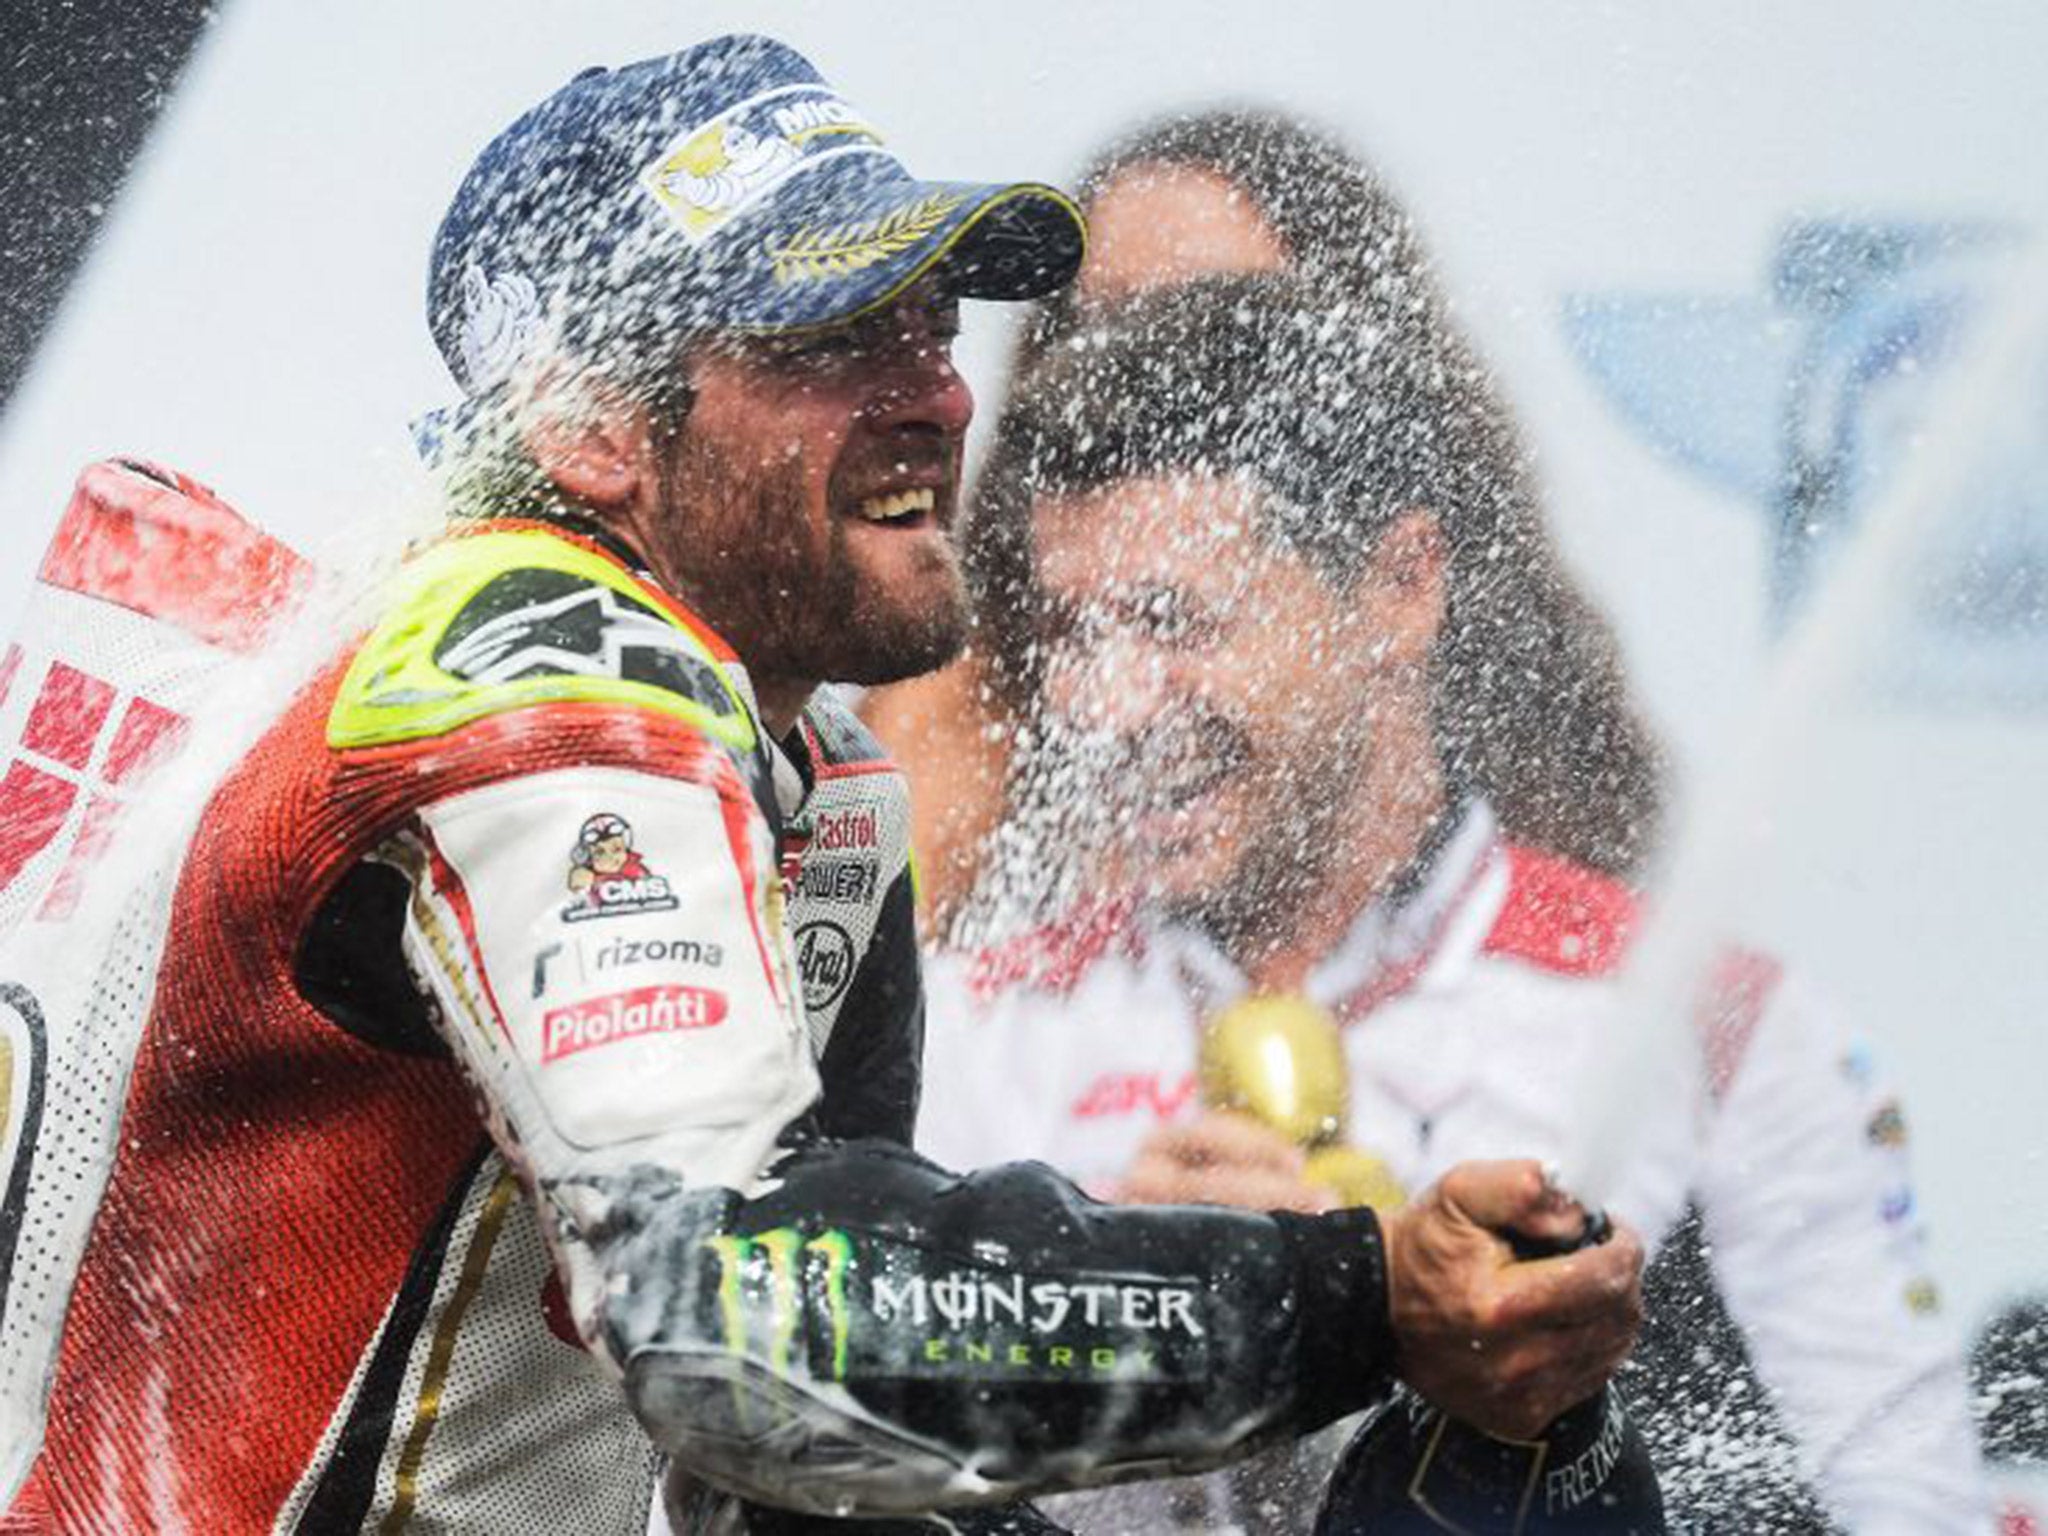 Crutchlow stood on the top step of the podium for the first time in his career